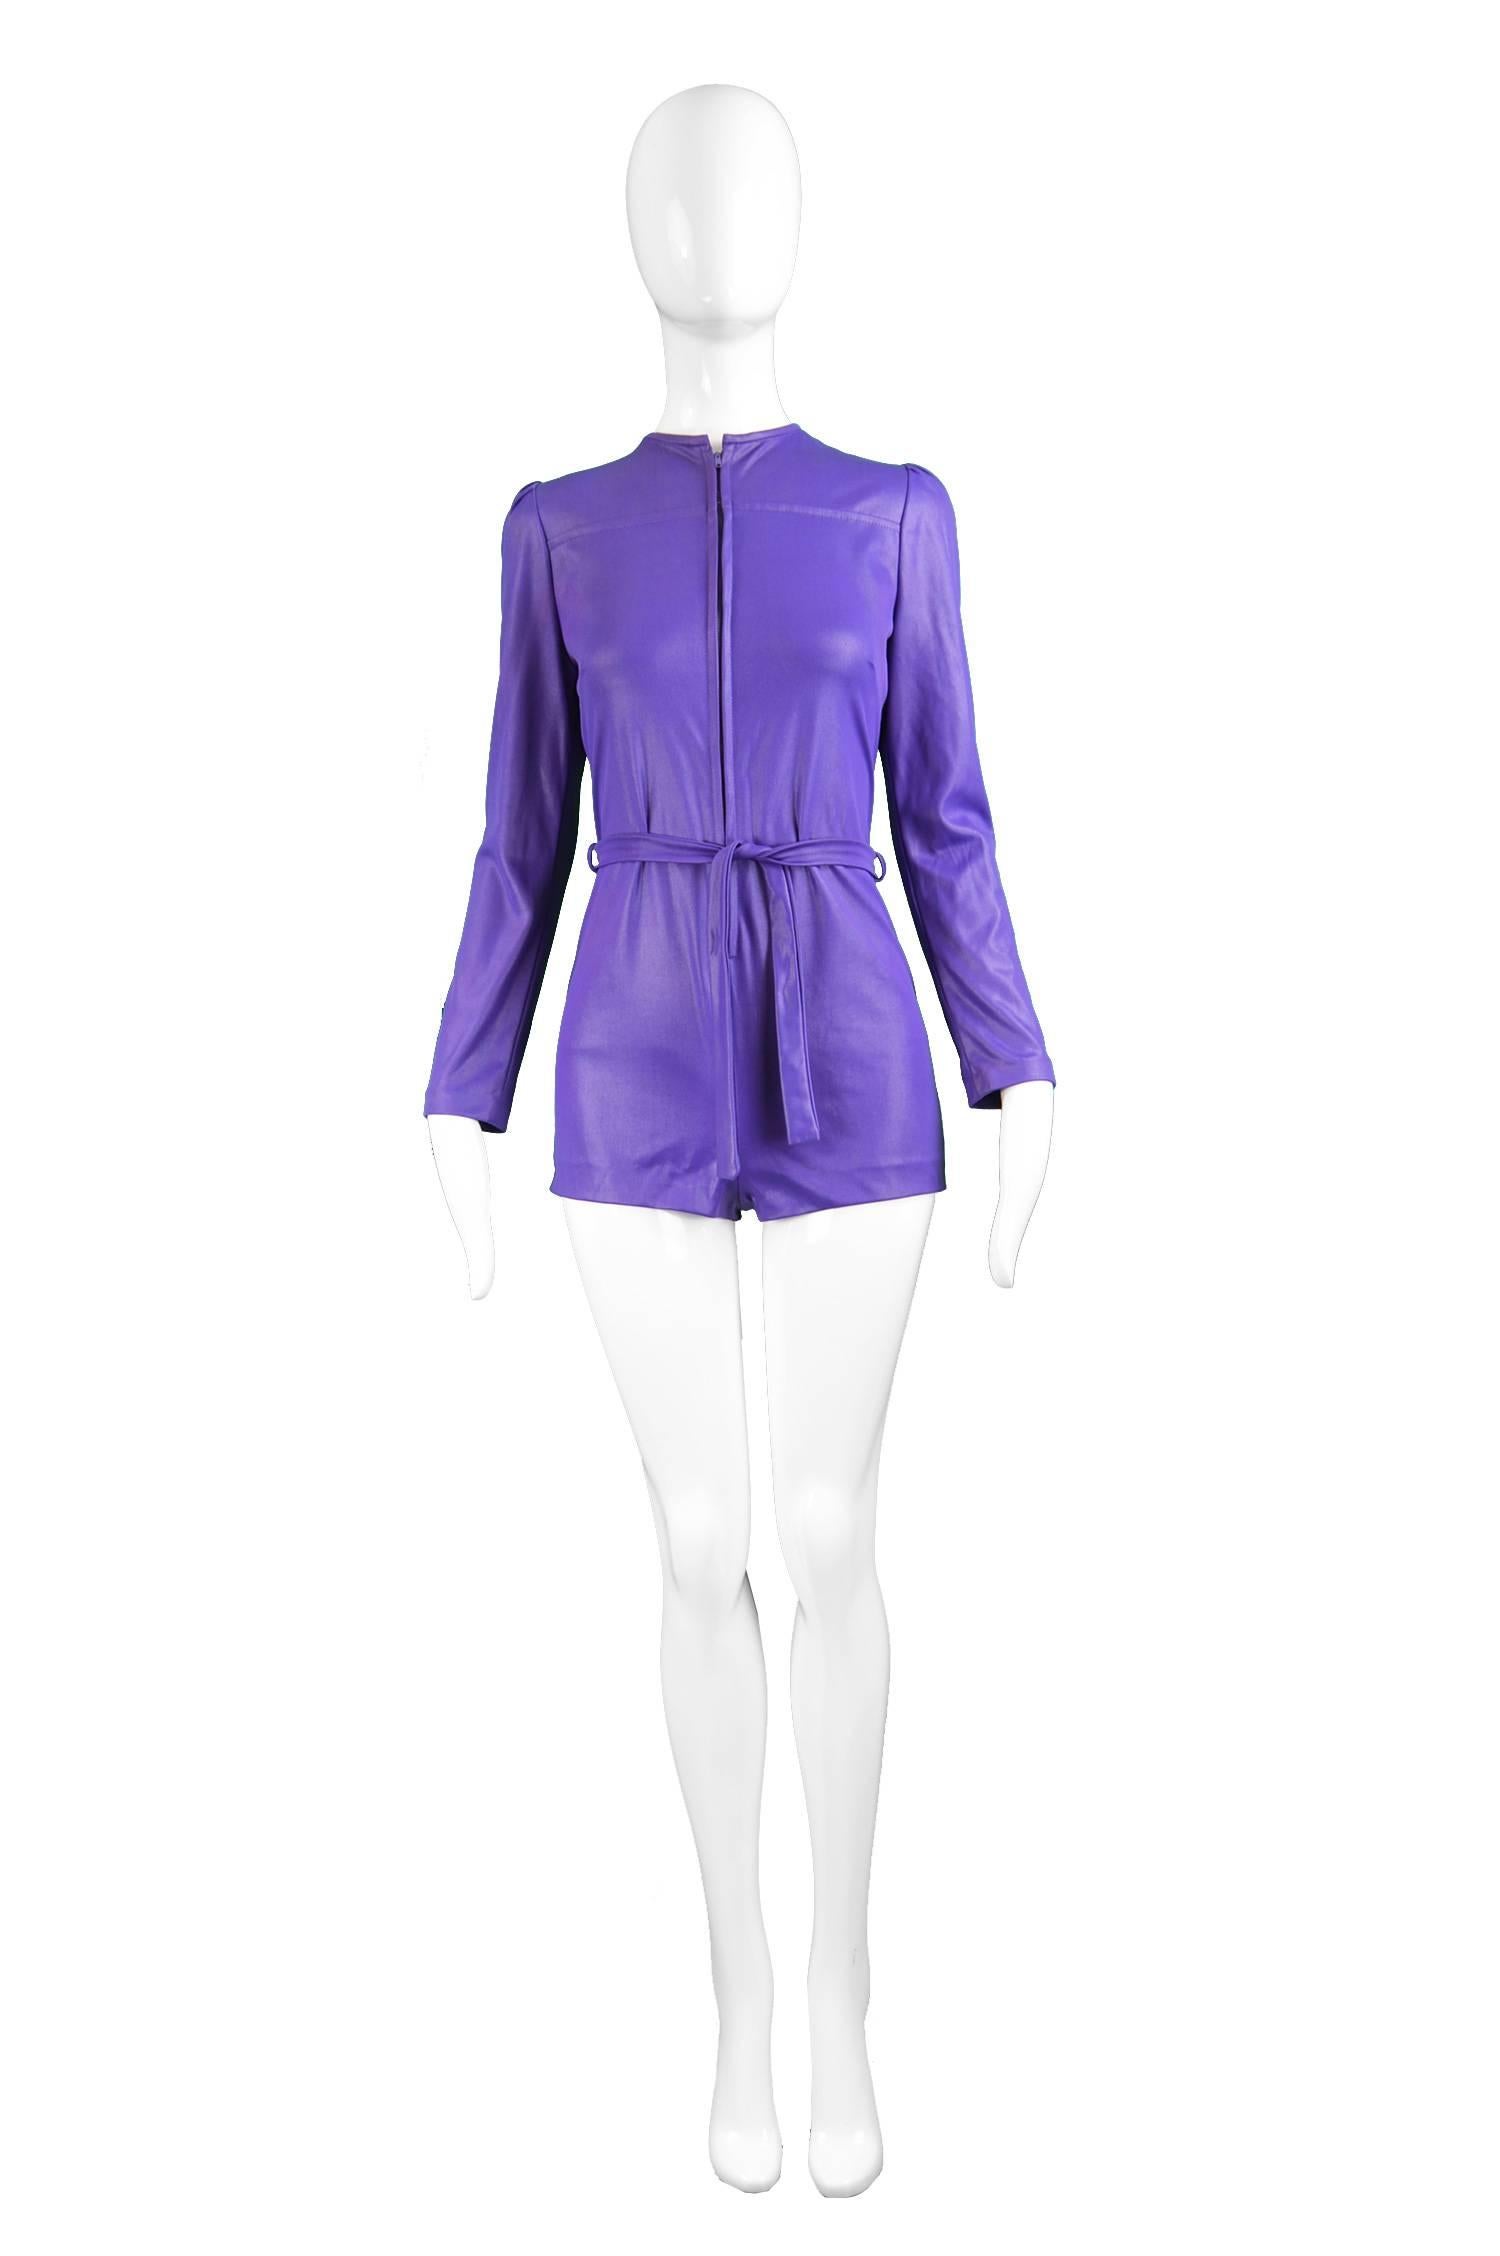 London Mob of Carnaby Street Purple Wet Look Playsuit, 1960s

Size: fits roughly like a modern women's UK 8/ US 4/ EU 36 (Check measurements to ensure best fit)
Bust - 32” / 81cm
Waist - 28” / 71cm (can be pulled in with belt)
Hips - 34” / 86cm